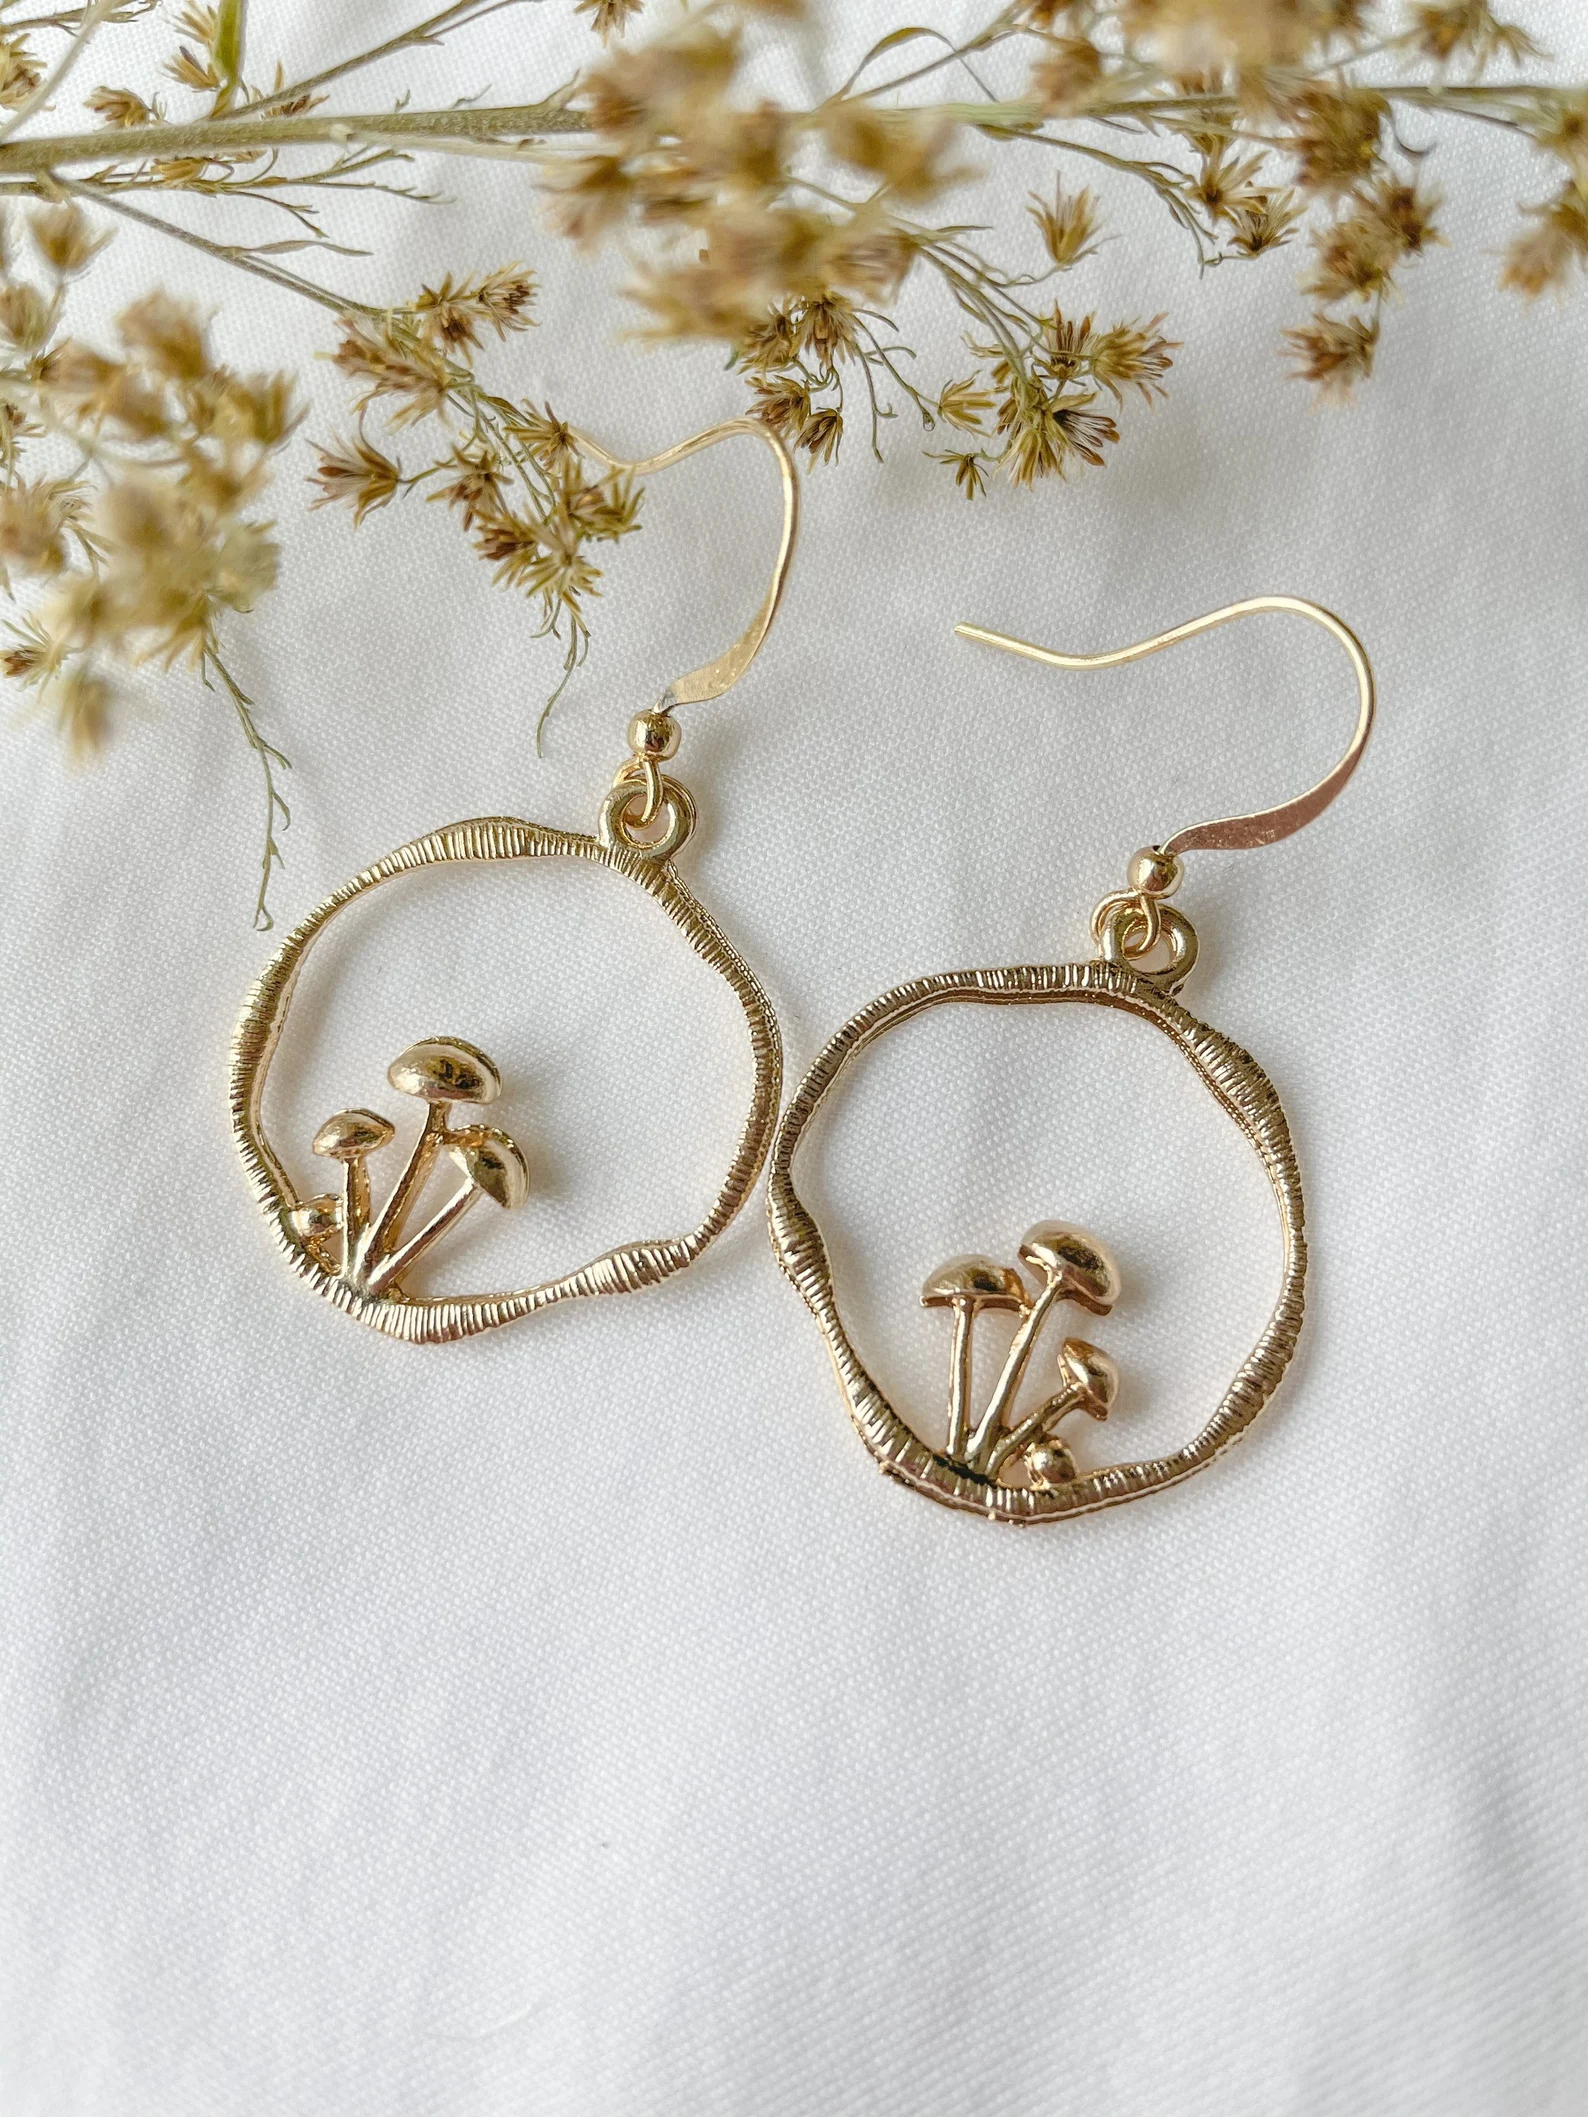 Adorable Earring Styles You Need in Your
Collection